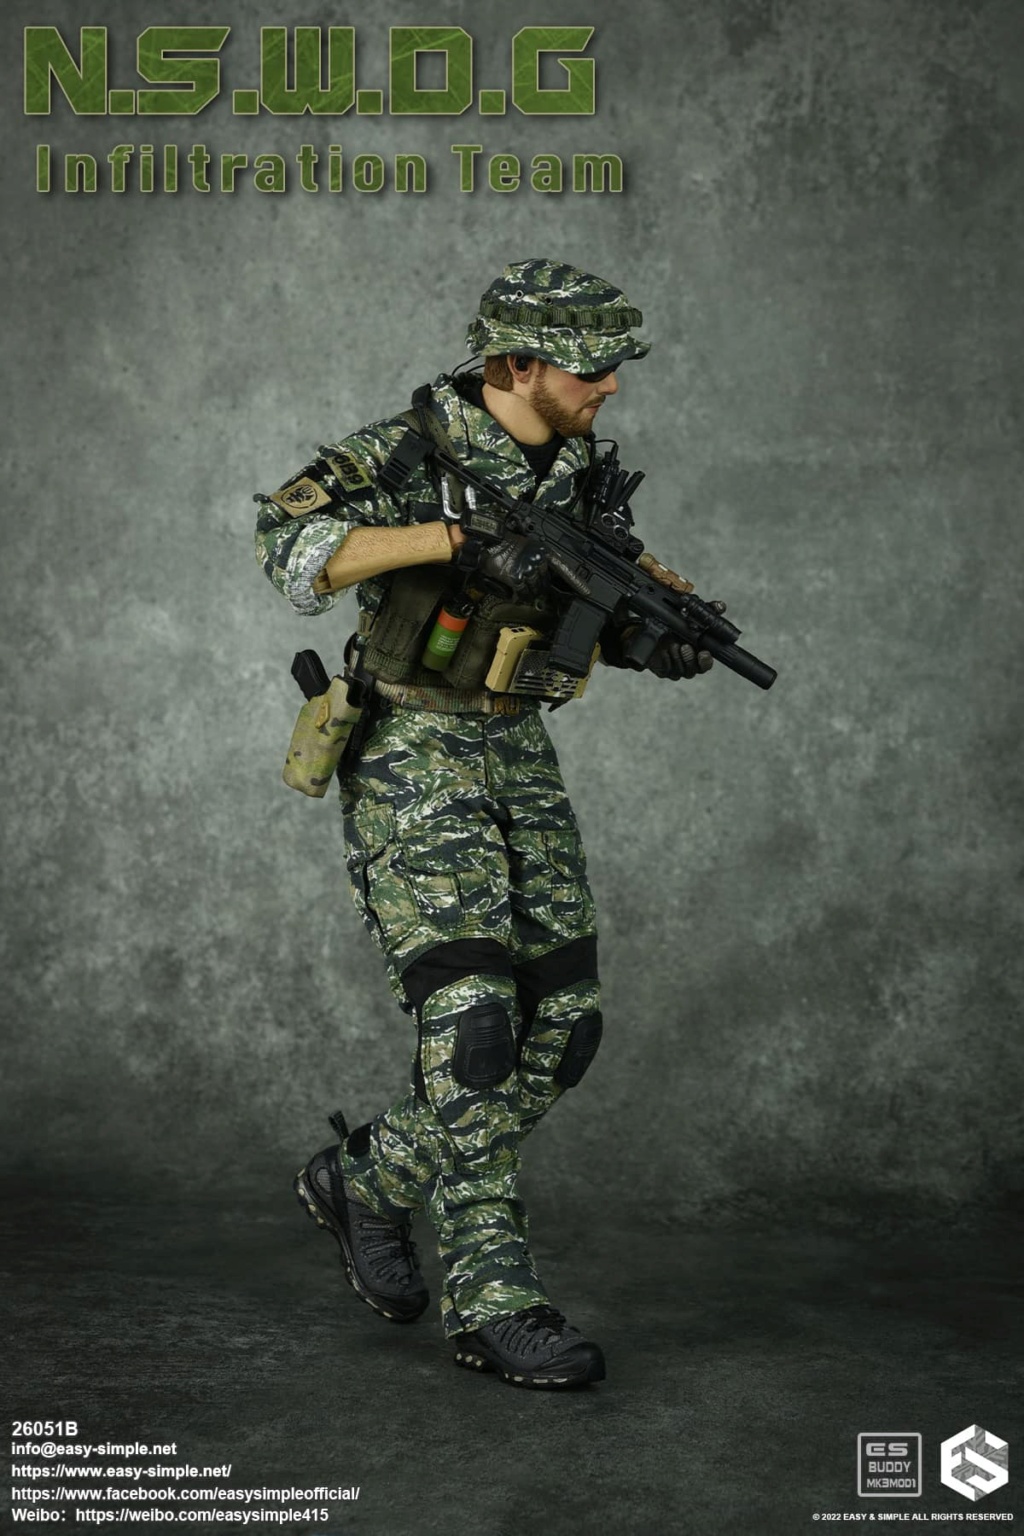 ModernMilitary - NEW PRODUCT: EASY AND SIMPLE 1/6 SCALE FIGURE: N.S.W.D.G INFILTRATION TEAM - (2 Versions) 9554